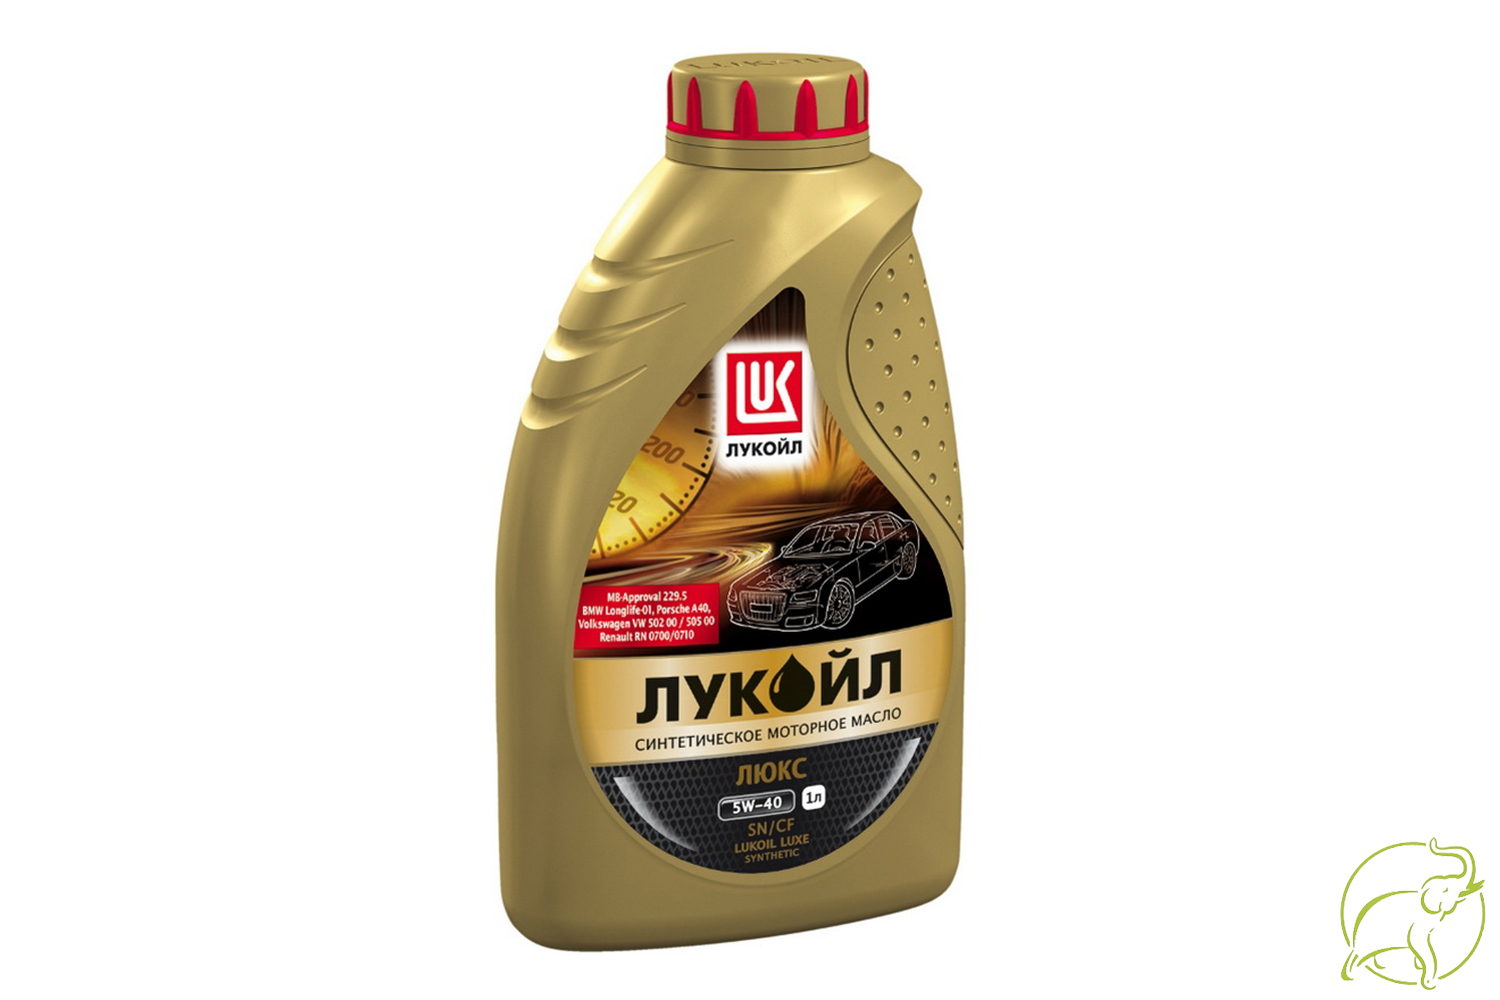 Поло масло лукойл. Масло Лукойл Люкс 1л синт 5w40. Lukoil Luxe, Synthetic SAE 5w-40, API SN/CF. Масло моторное Лукойл Люкс синтетическое SAE 5w-40 API SN/CF. Масло Лукойл Люкс моторное синтетич.SAE 5w40 1л.